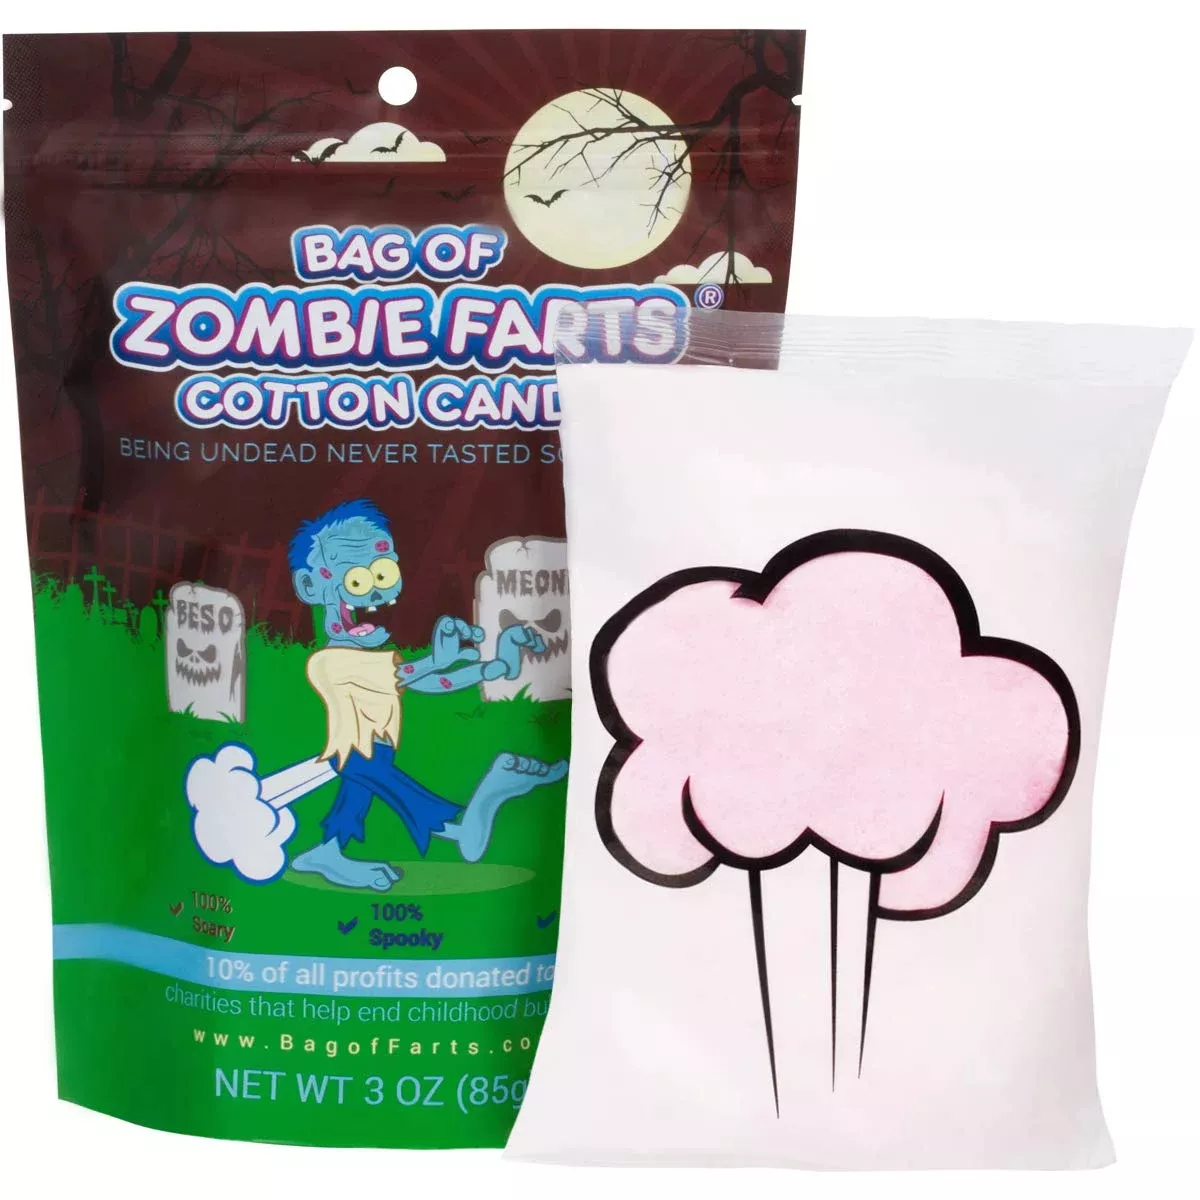 Best Halloween Gifts 2023: Zombie Farts Cotton Candy 2023